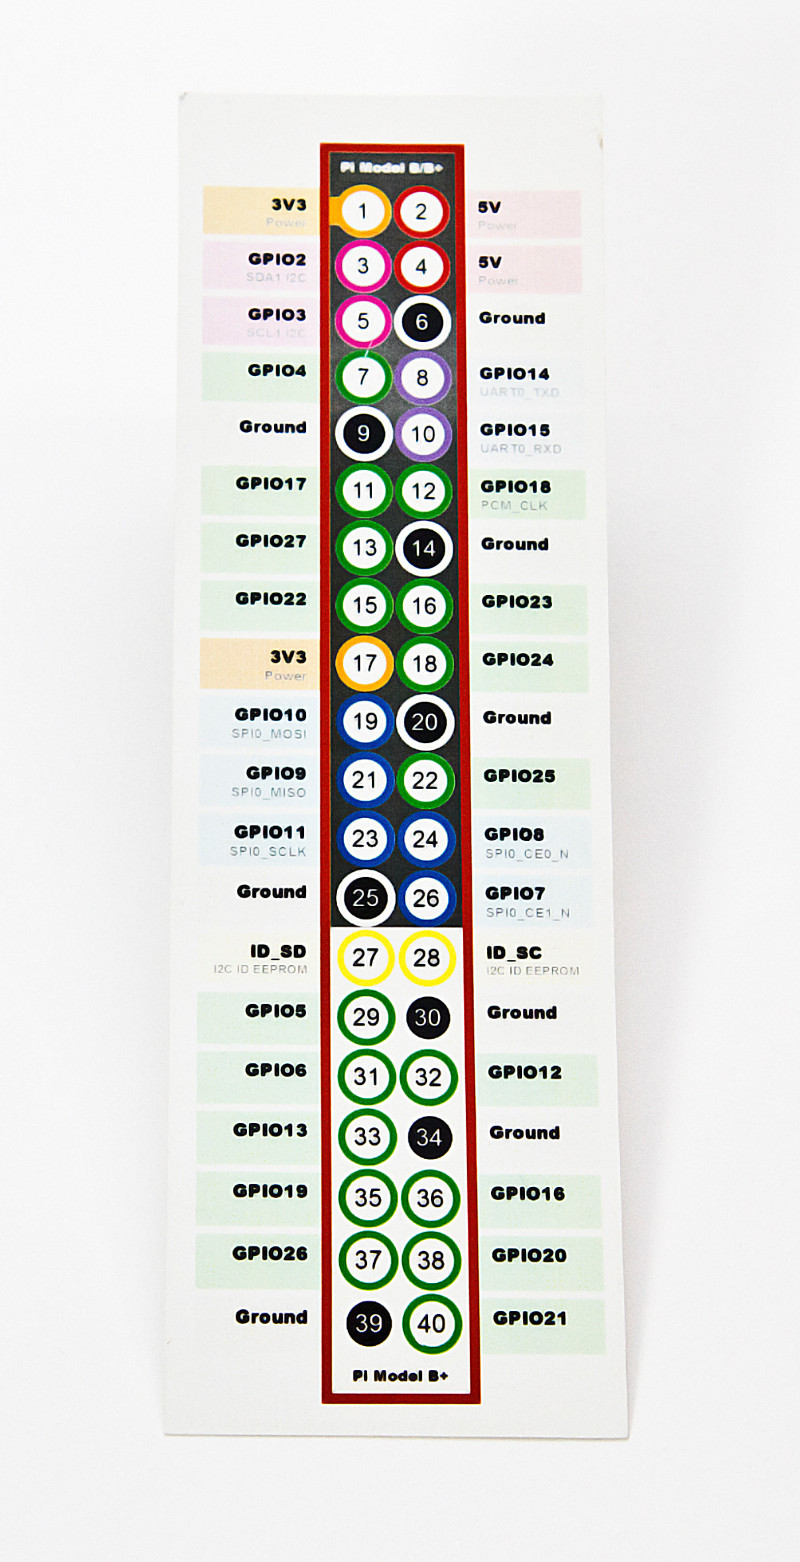 A GPIO ruler provides a handy reference guide to which coloured pin does what